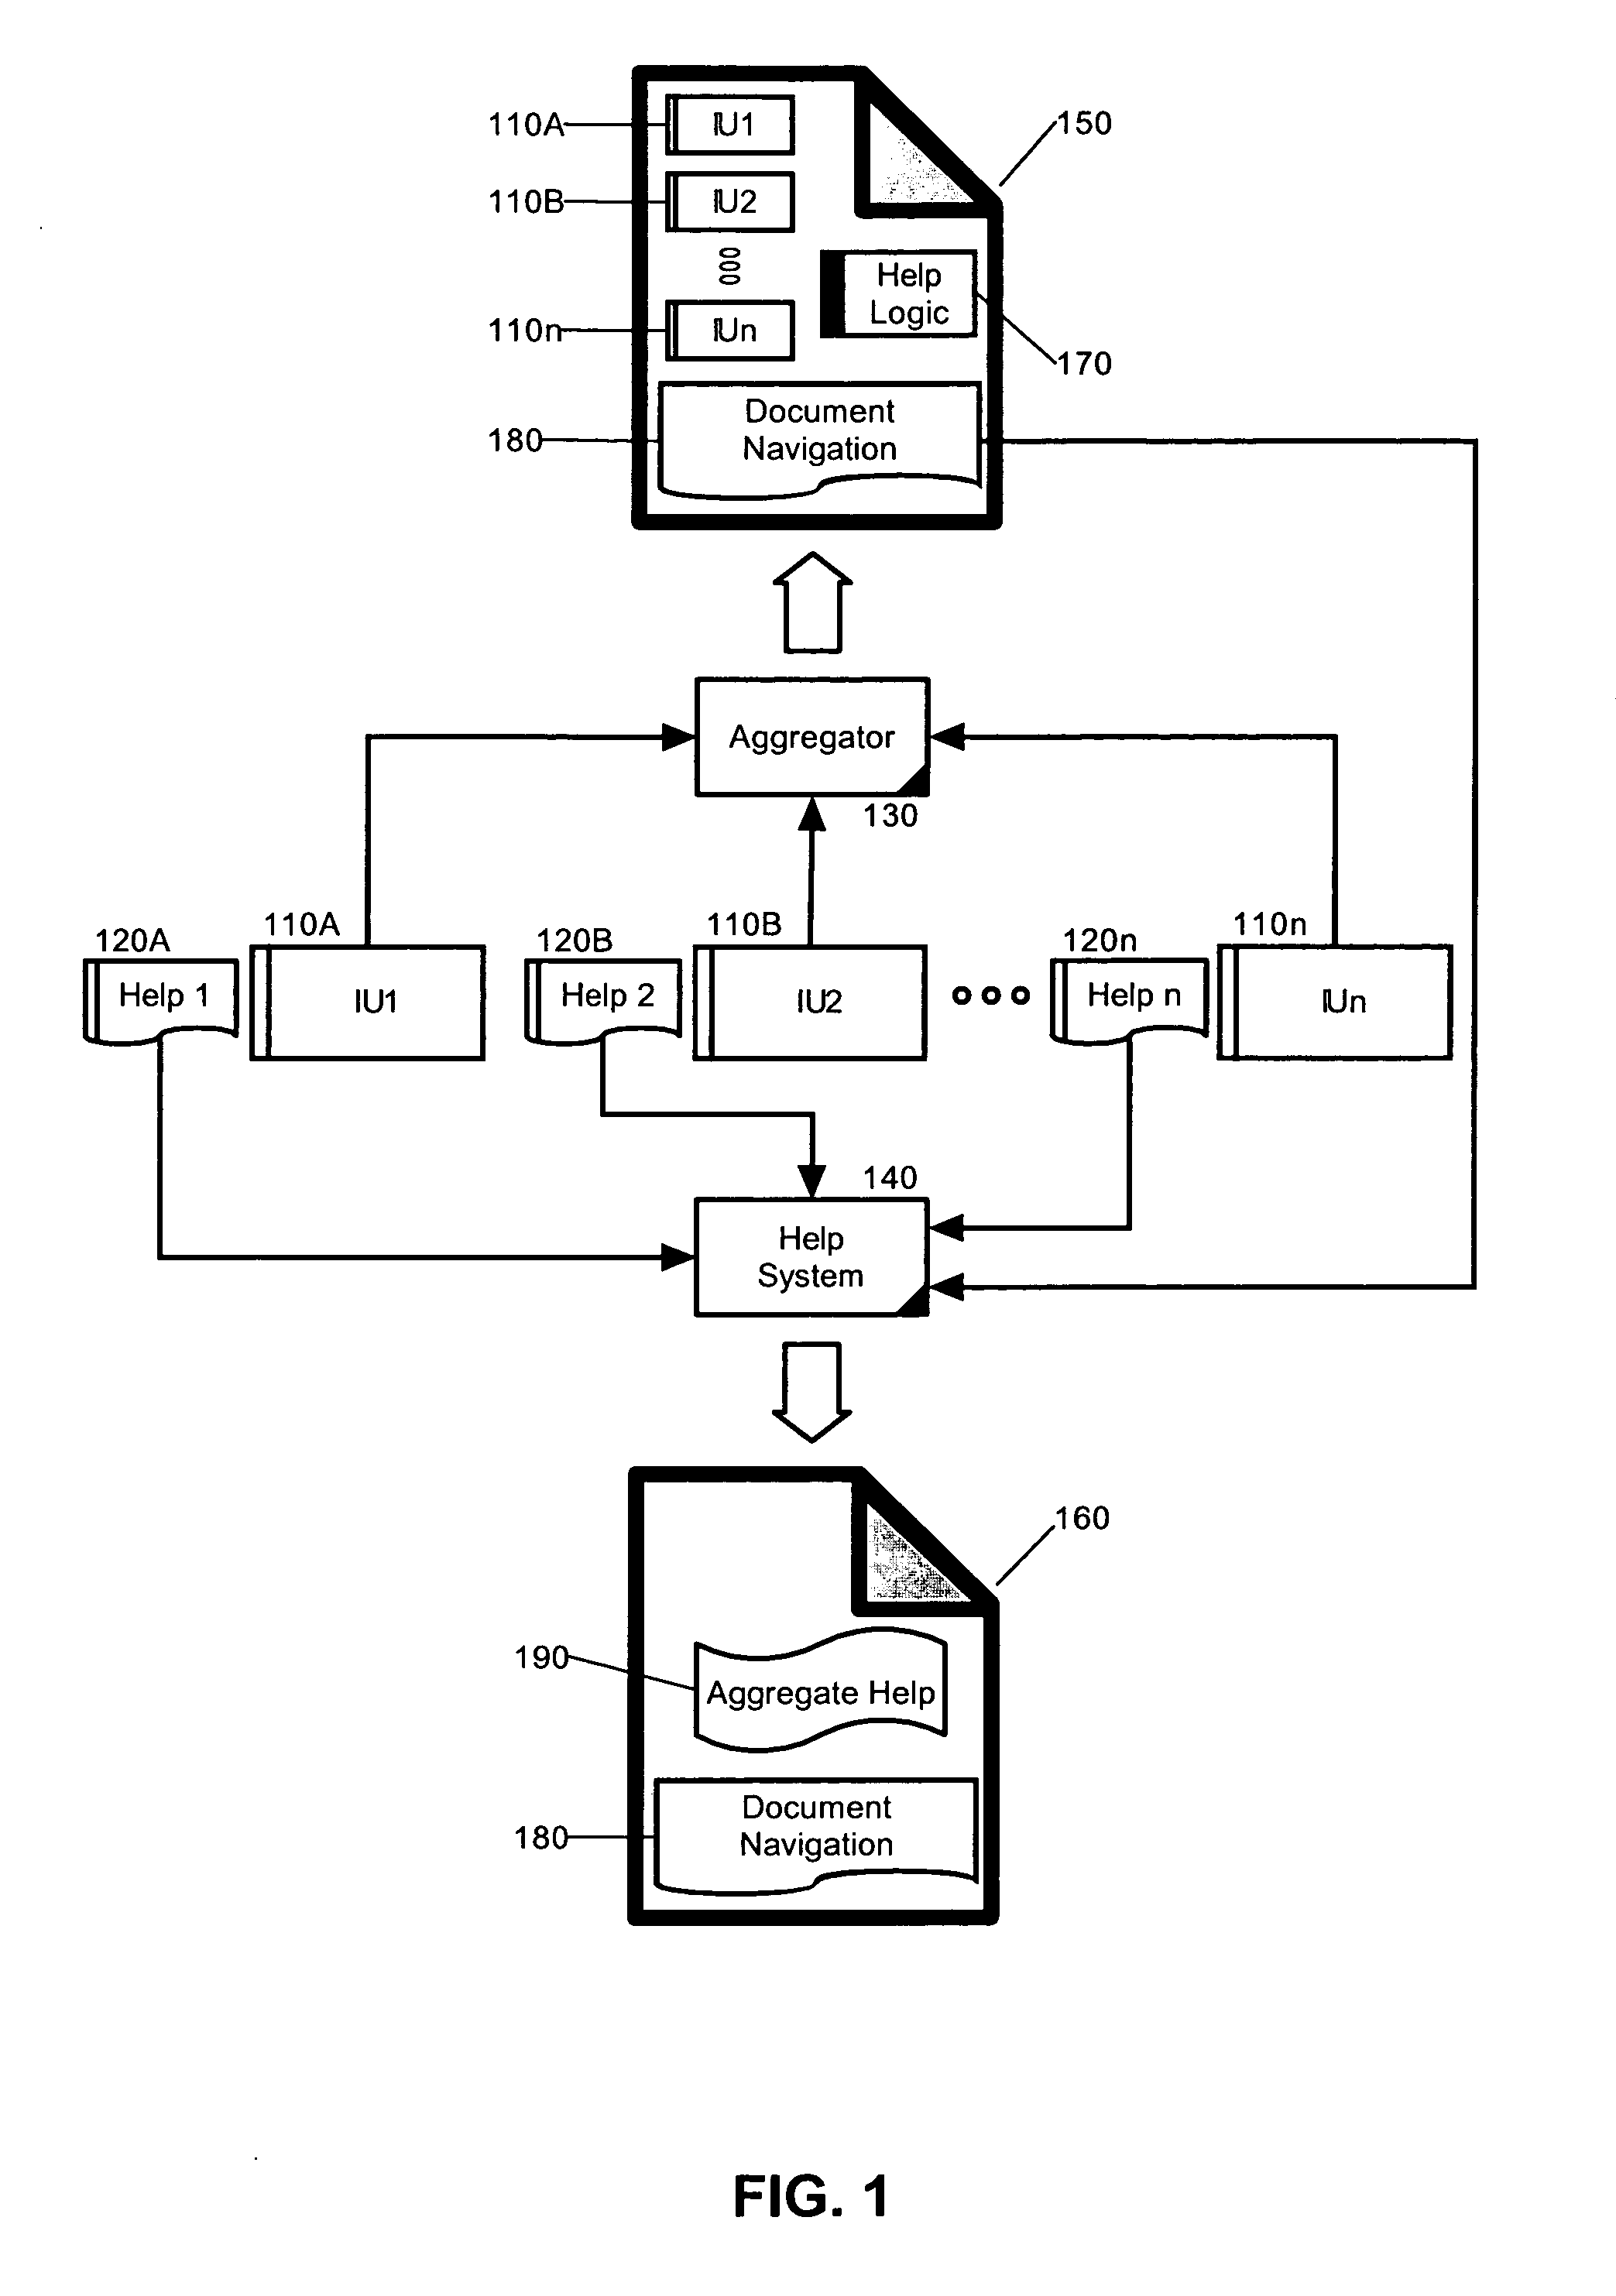 Search and query operations in a dynamic composition of help information for an aggregation of applications